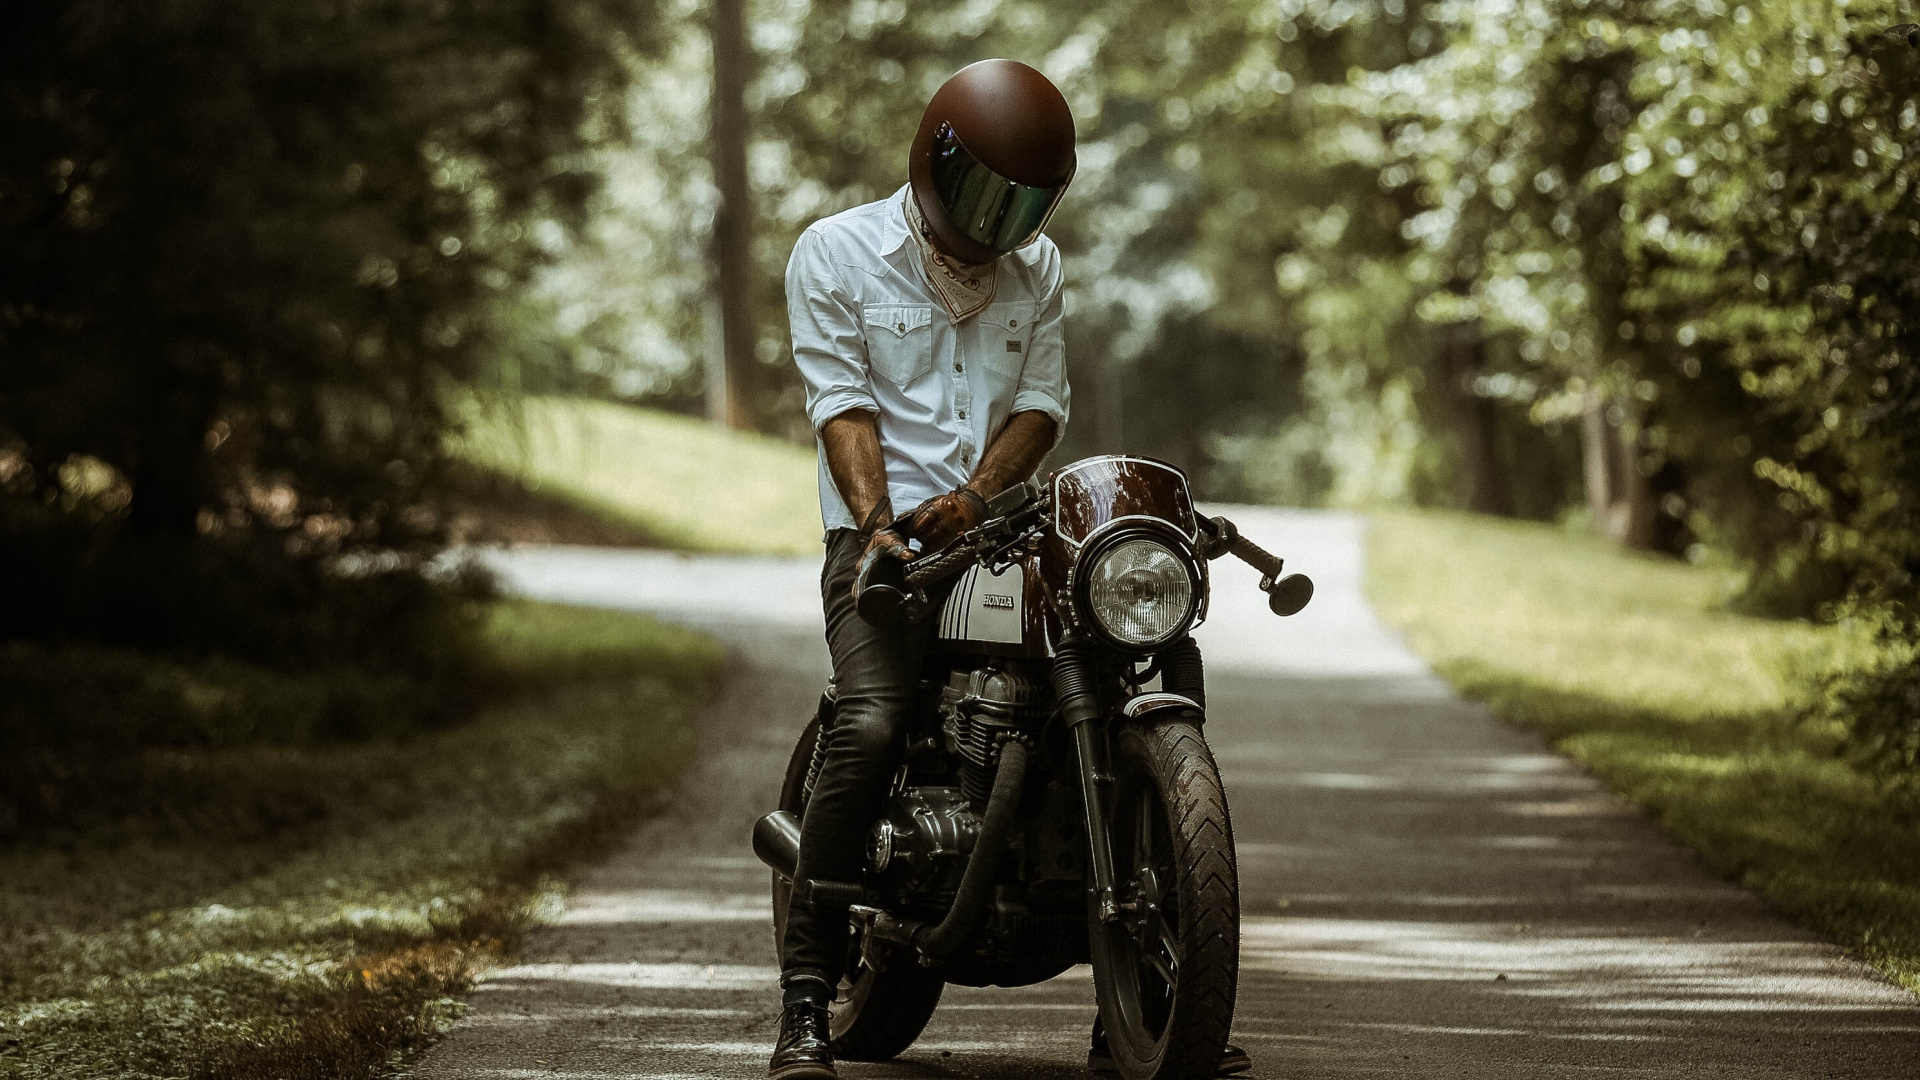 Man in White Shirt Riding Motorcycle on Road During Daytime. Wallpaper in 1920x1080 Resolution